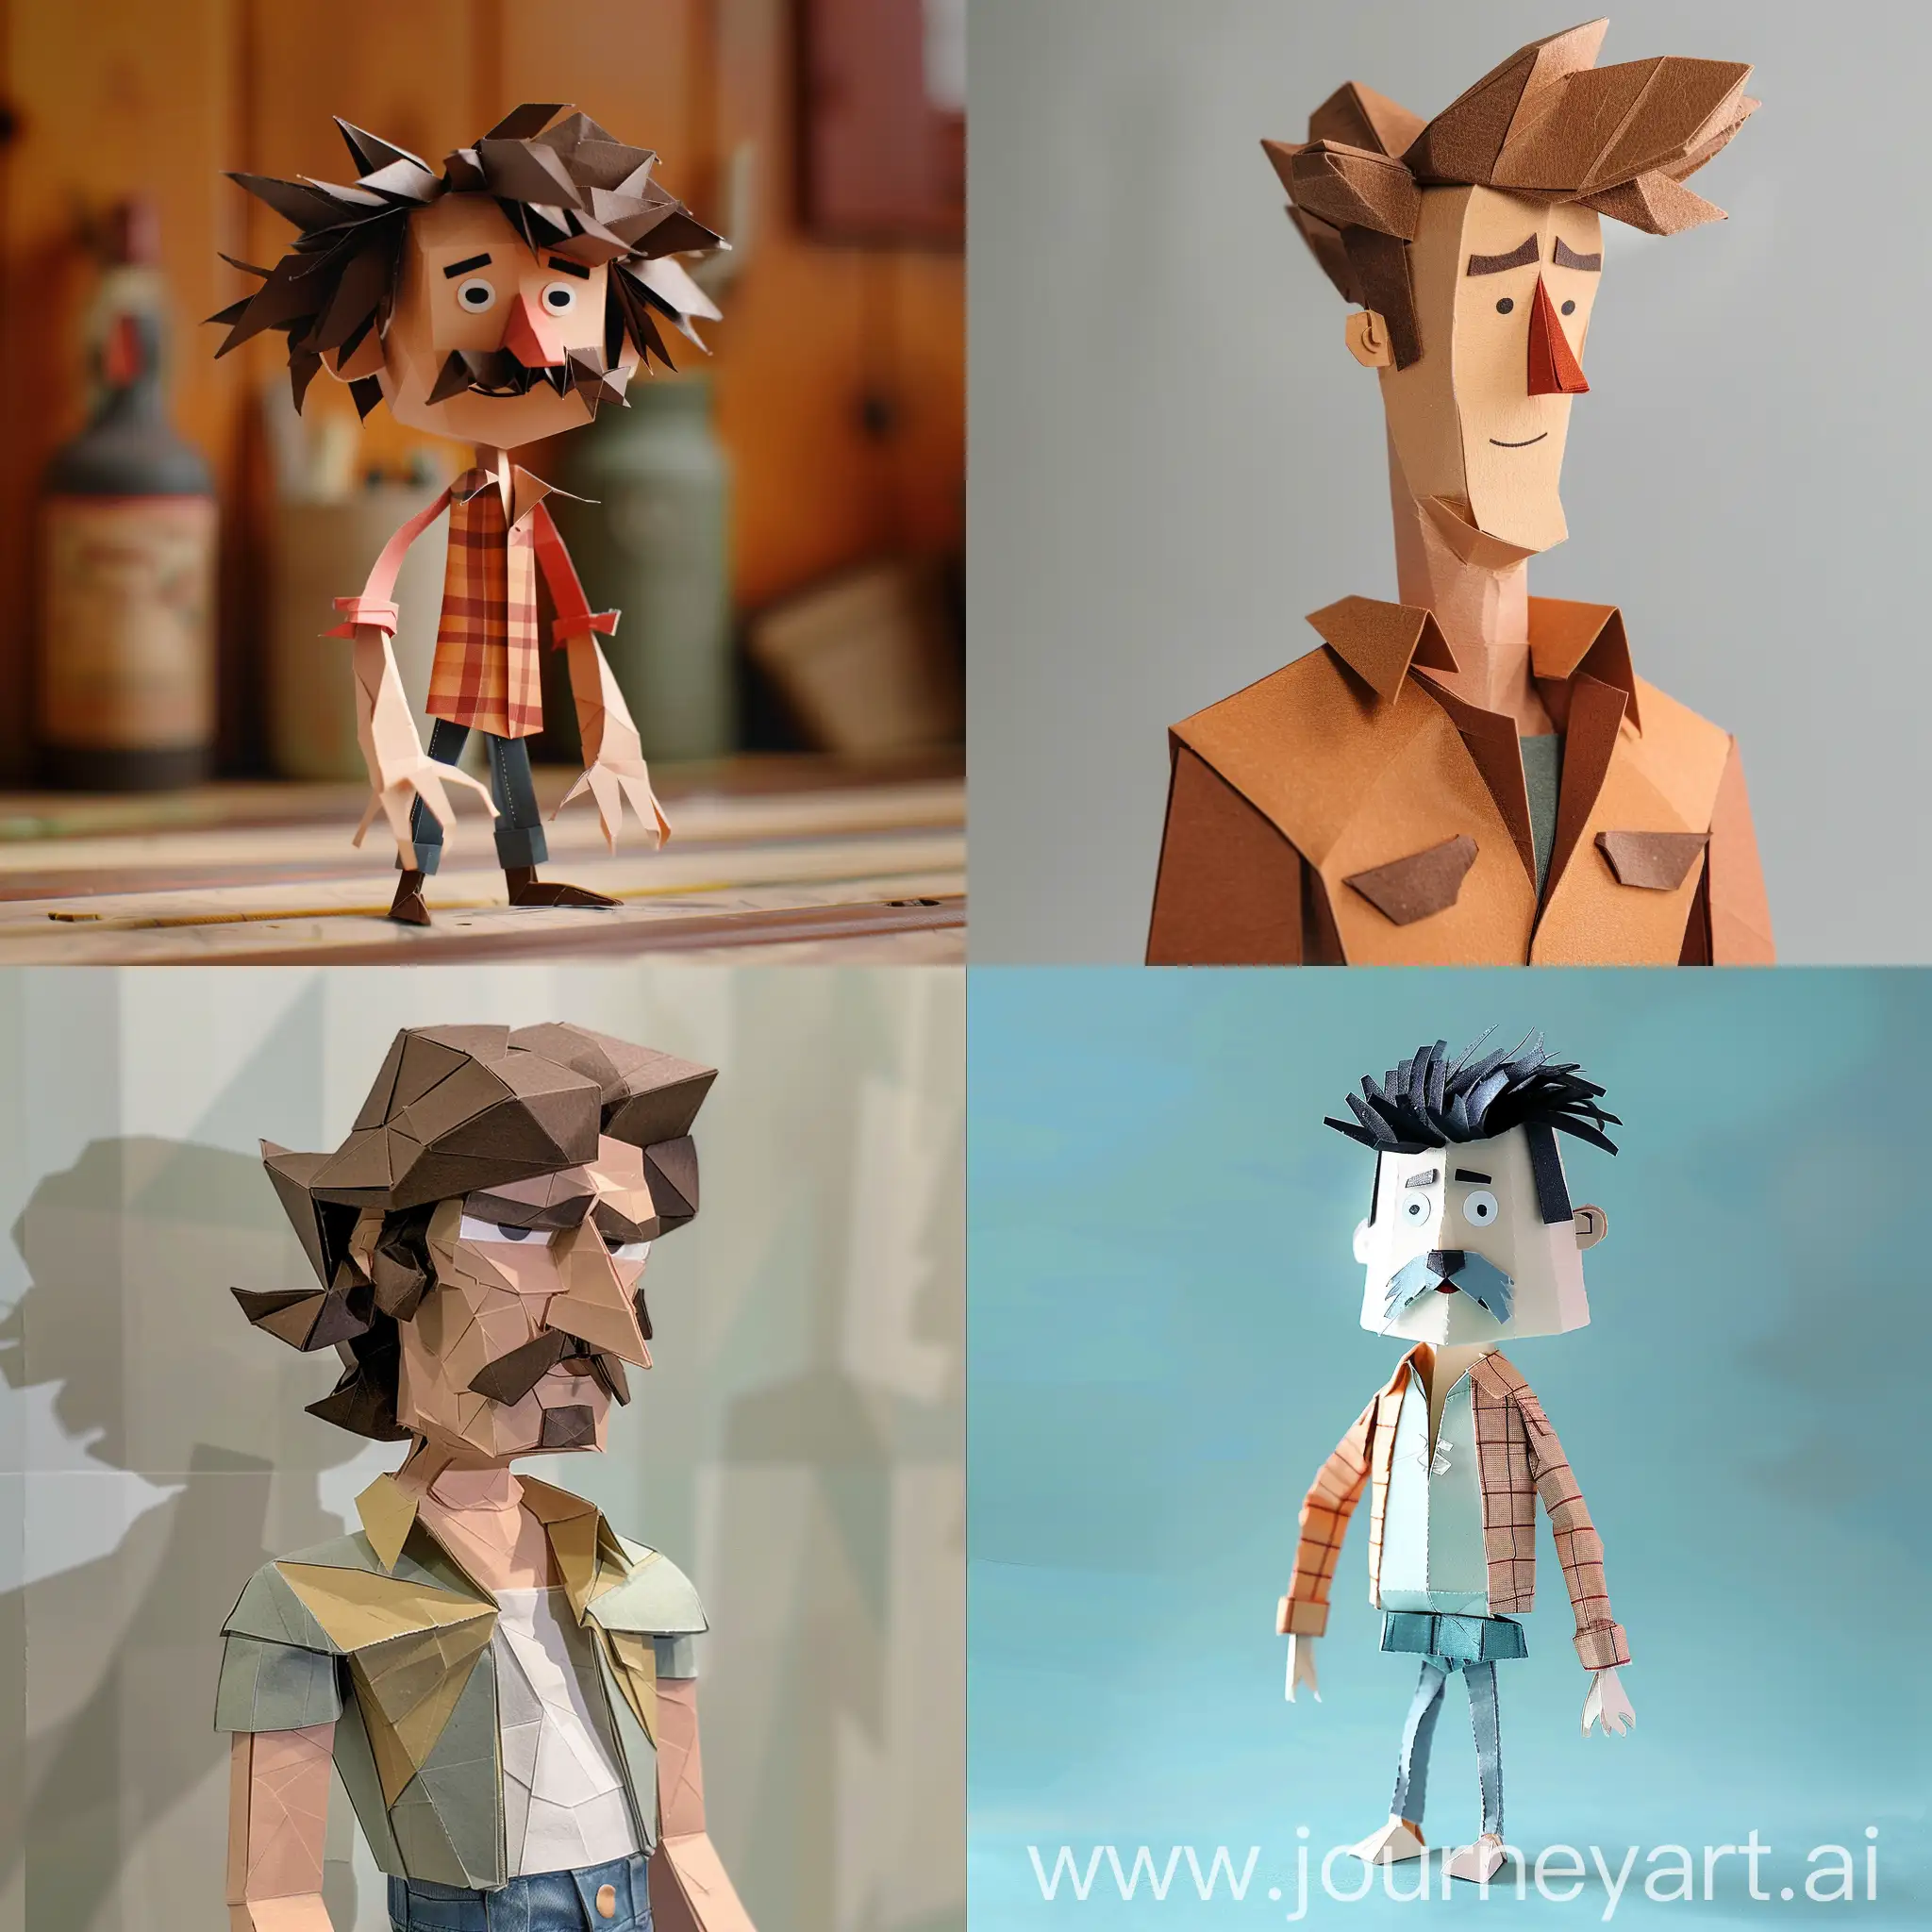 Minimalist-Claymation-Character-Design-Midwest-80s-Mullet-Dad-Paper-Sculpture